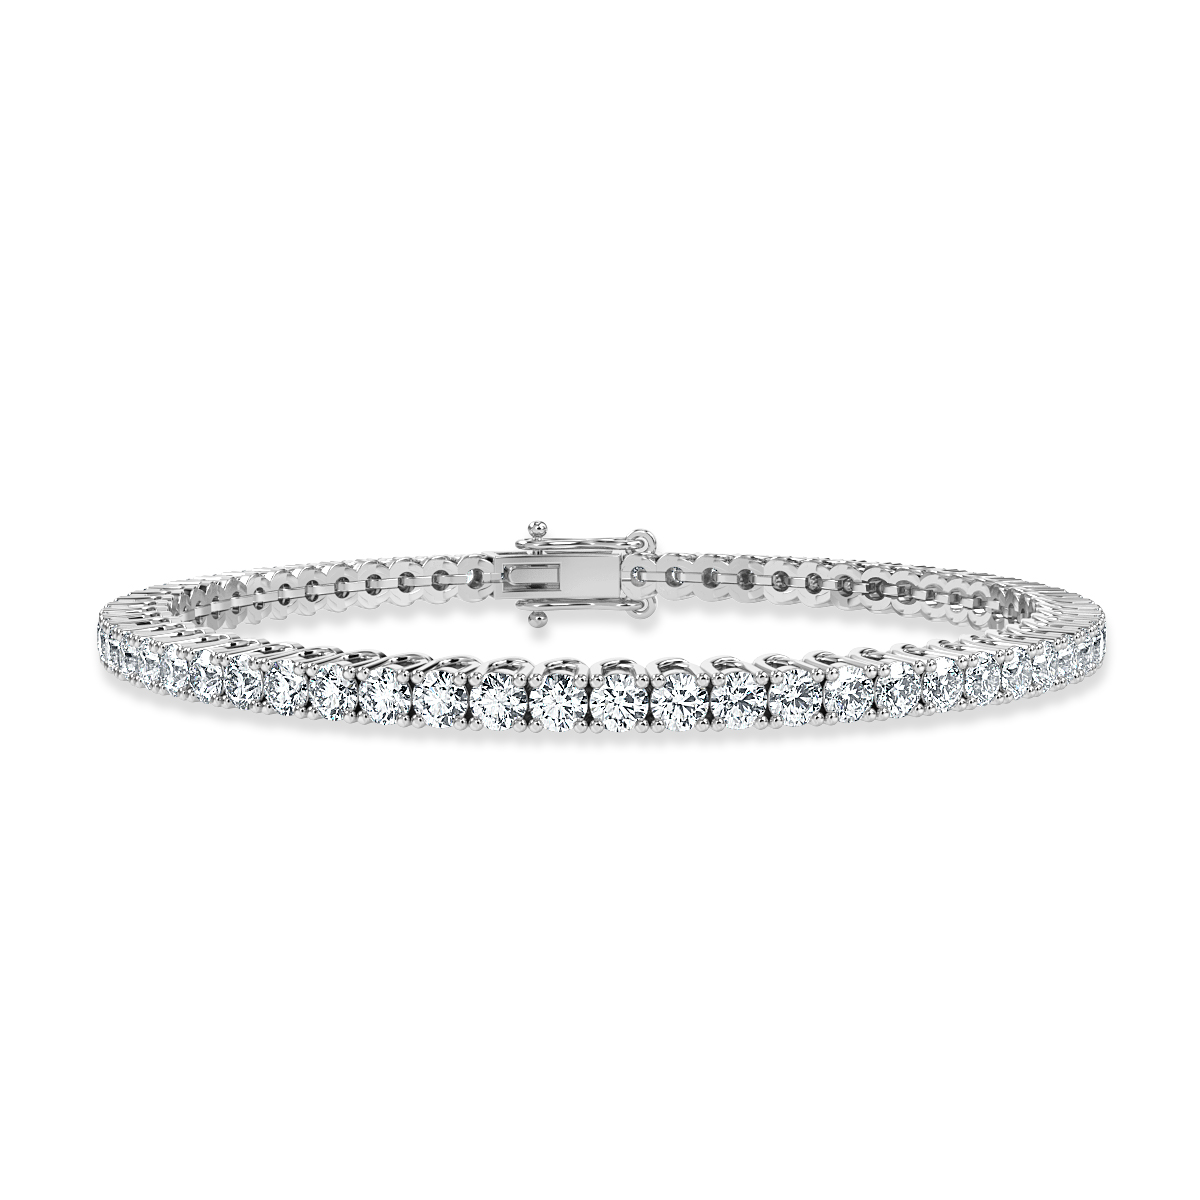 8 CT TW Certified LabCreated Diamond Tennis Bracelet in 10K White Gold  II1  725  Zales Outlet